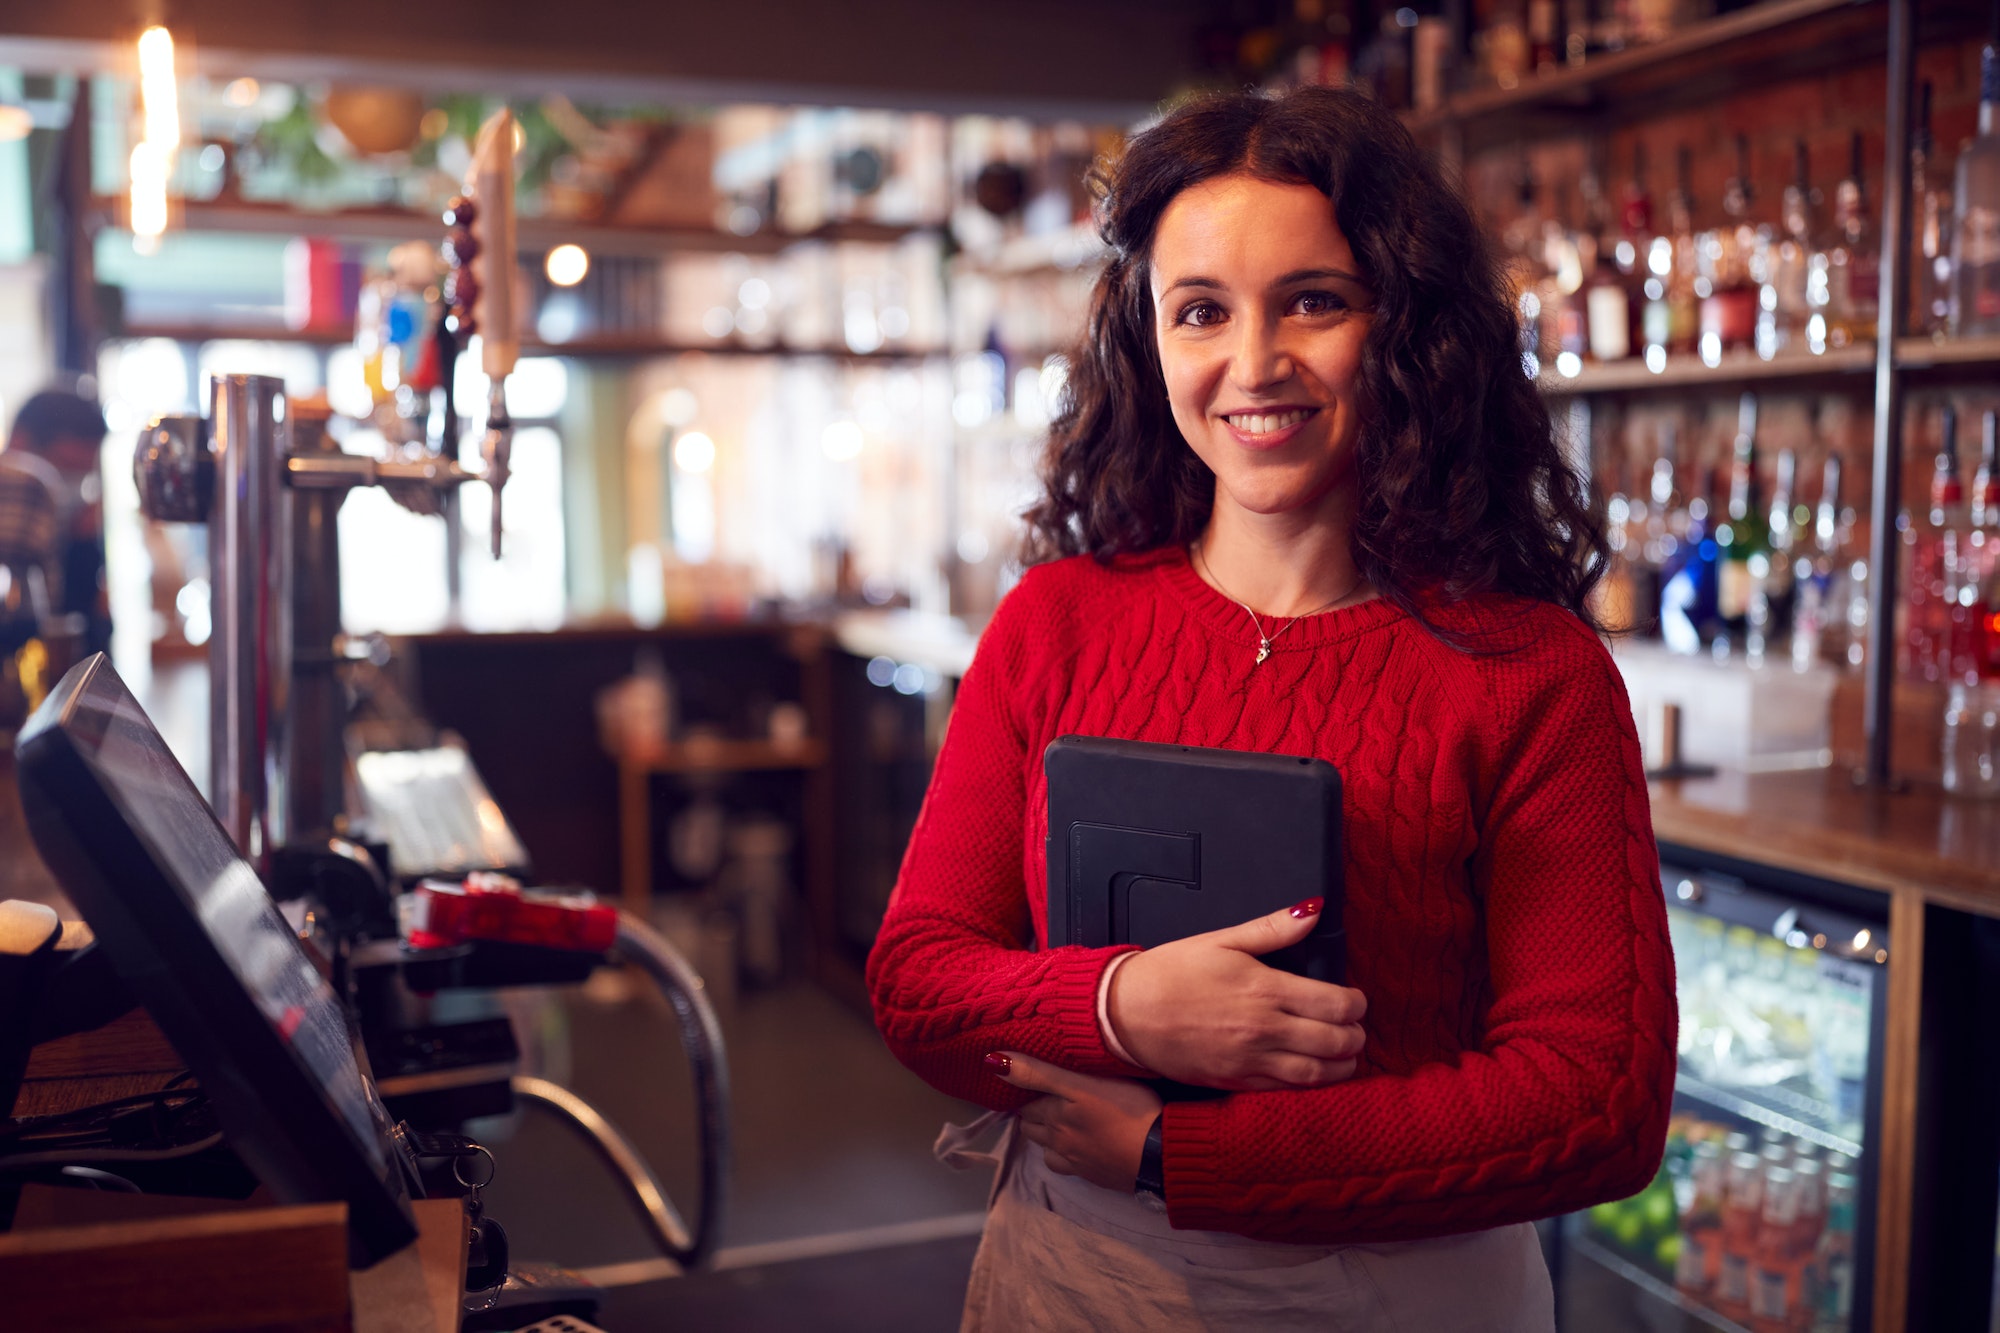 Portrait Of Smiling Female Bar Owner With Digital Tablet Standing Behind Counter